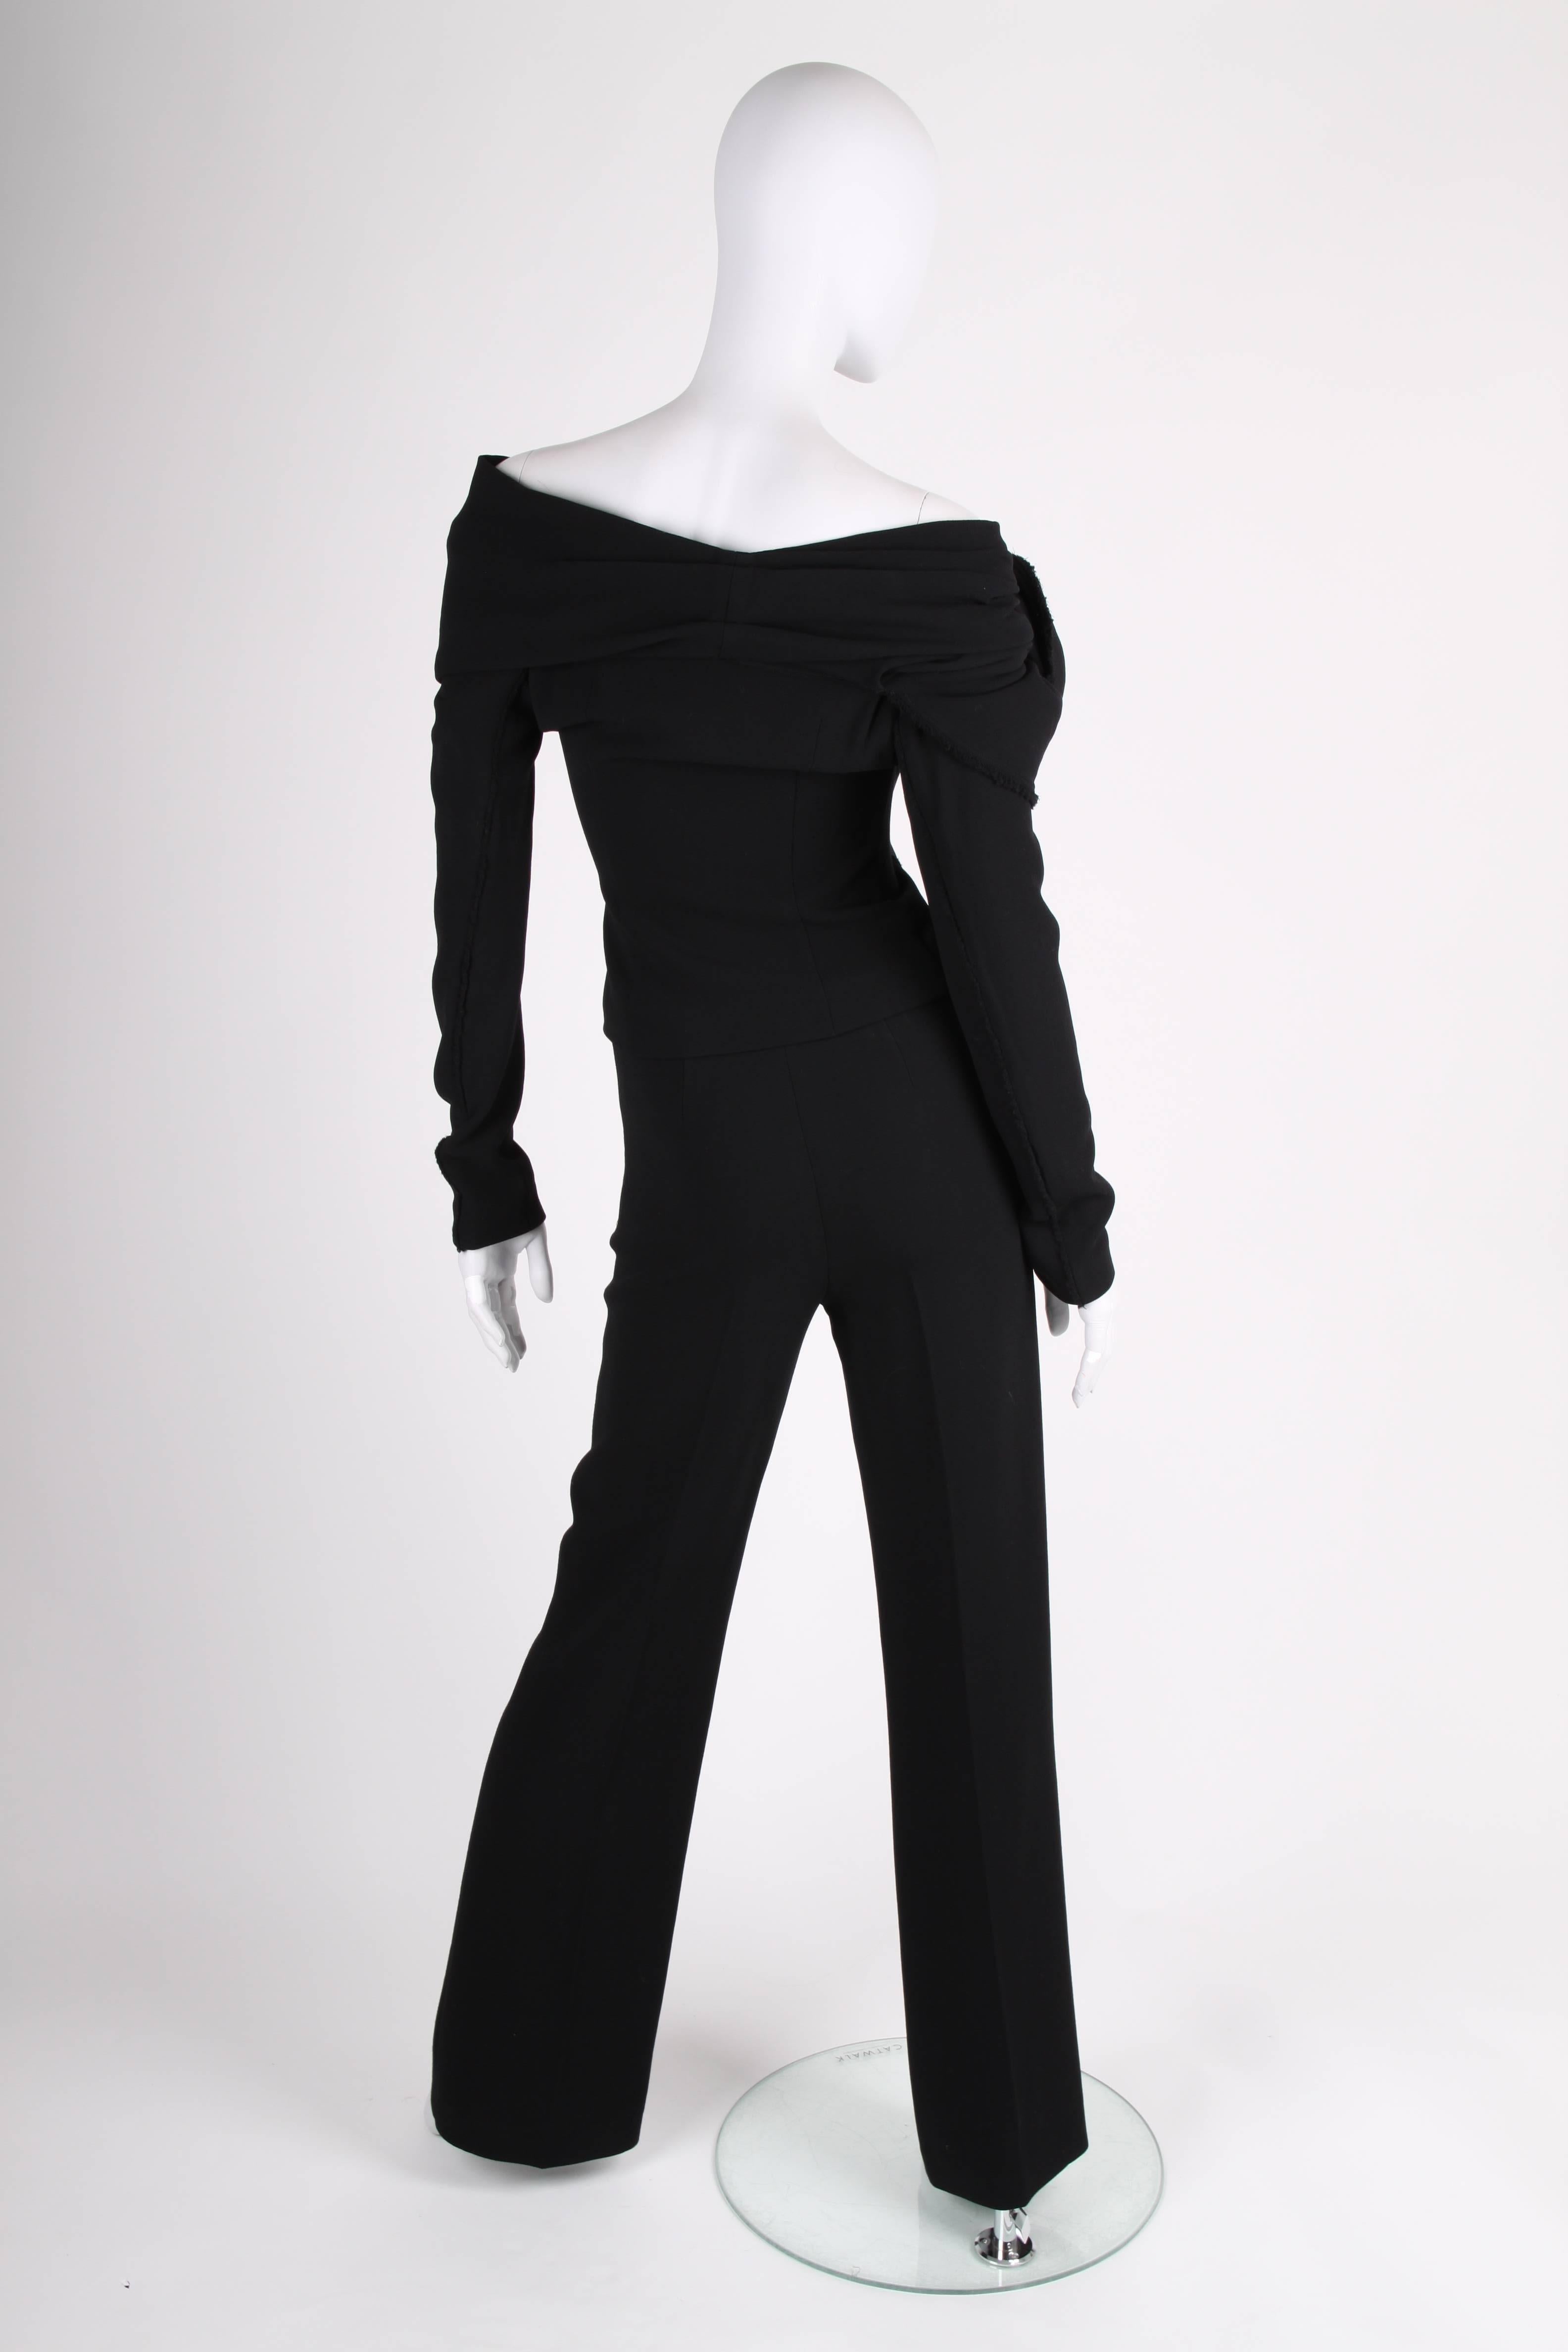 Donna Karan made this wonderful black suit! A wrap top and flared trousers.

The of-shoulder wrap top has hook closure on both sides, long sleeves, a large collar and is embellished with a XL flower on the right side. No lining. 

The pair of